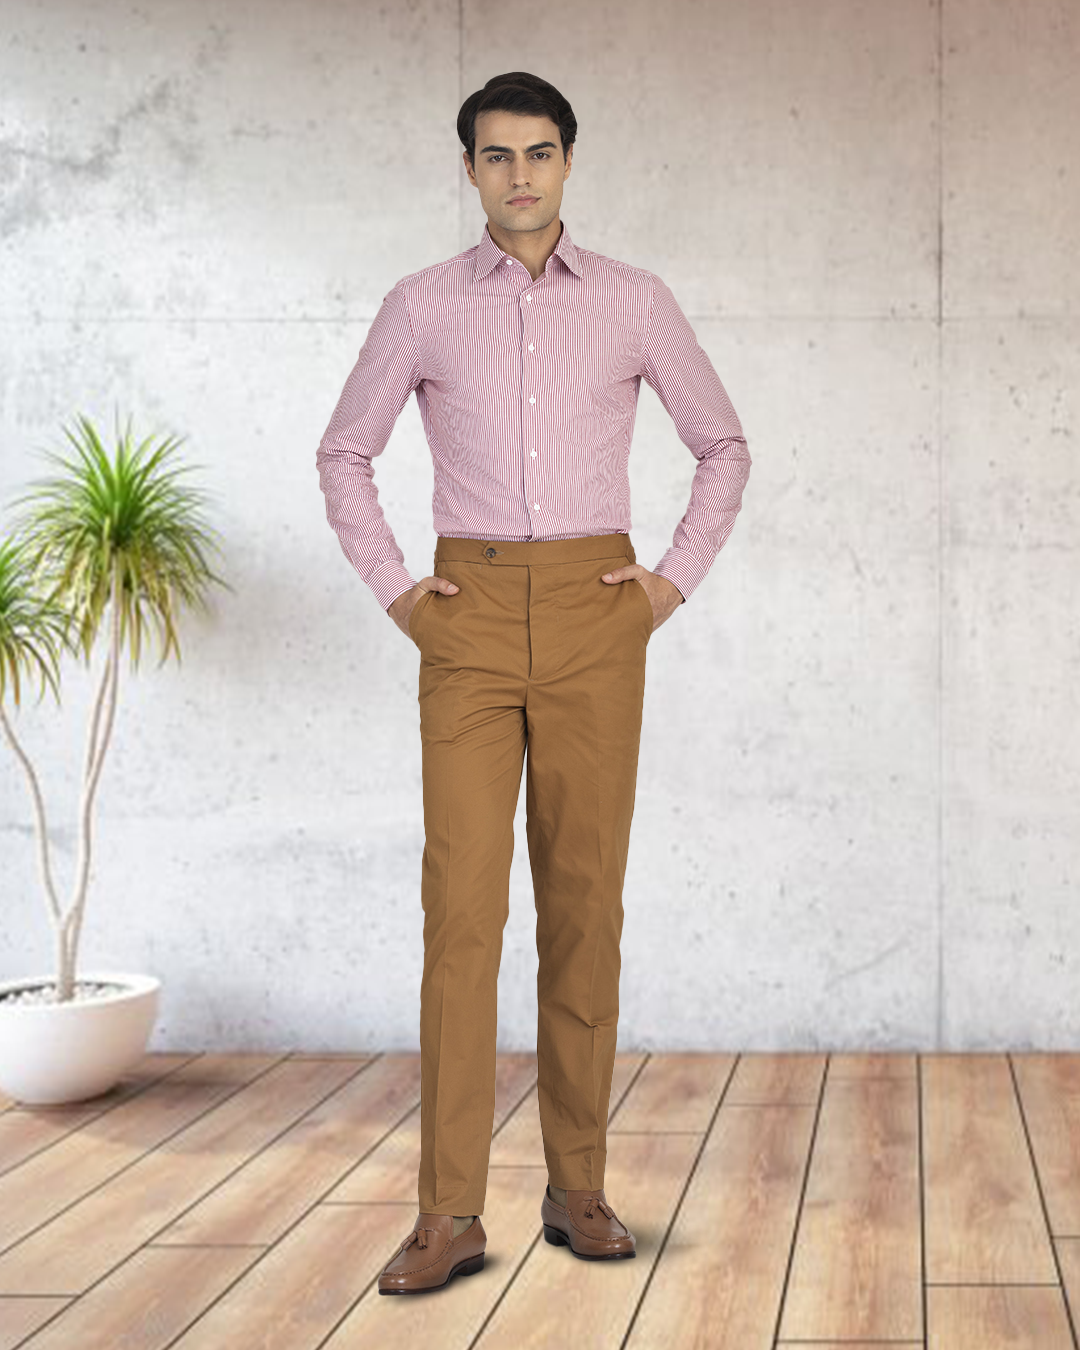 Brown Pants with Pink Shirt Outfit | TikTok